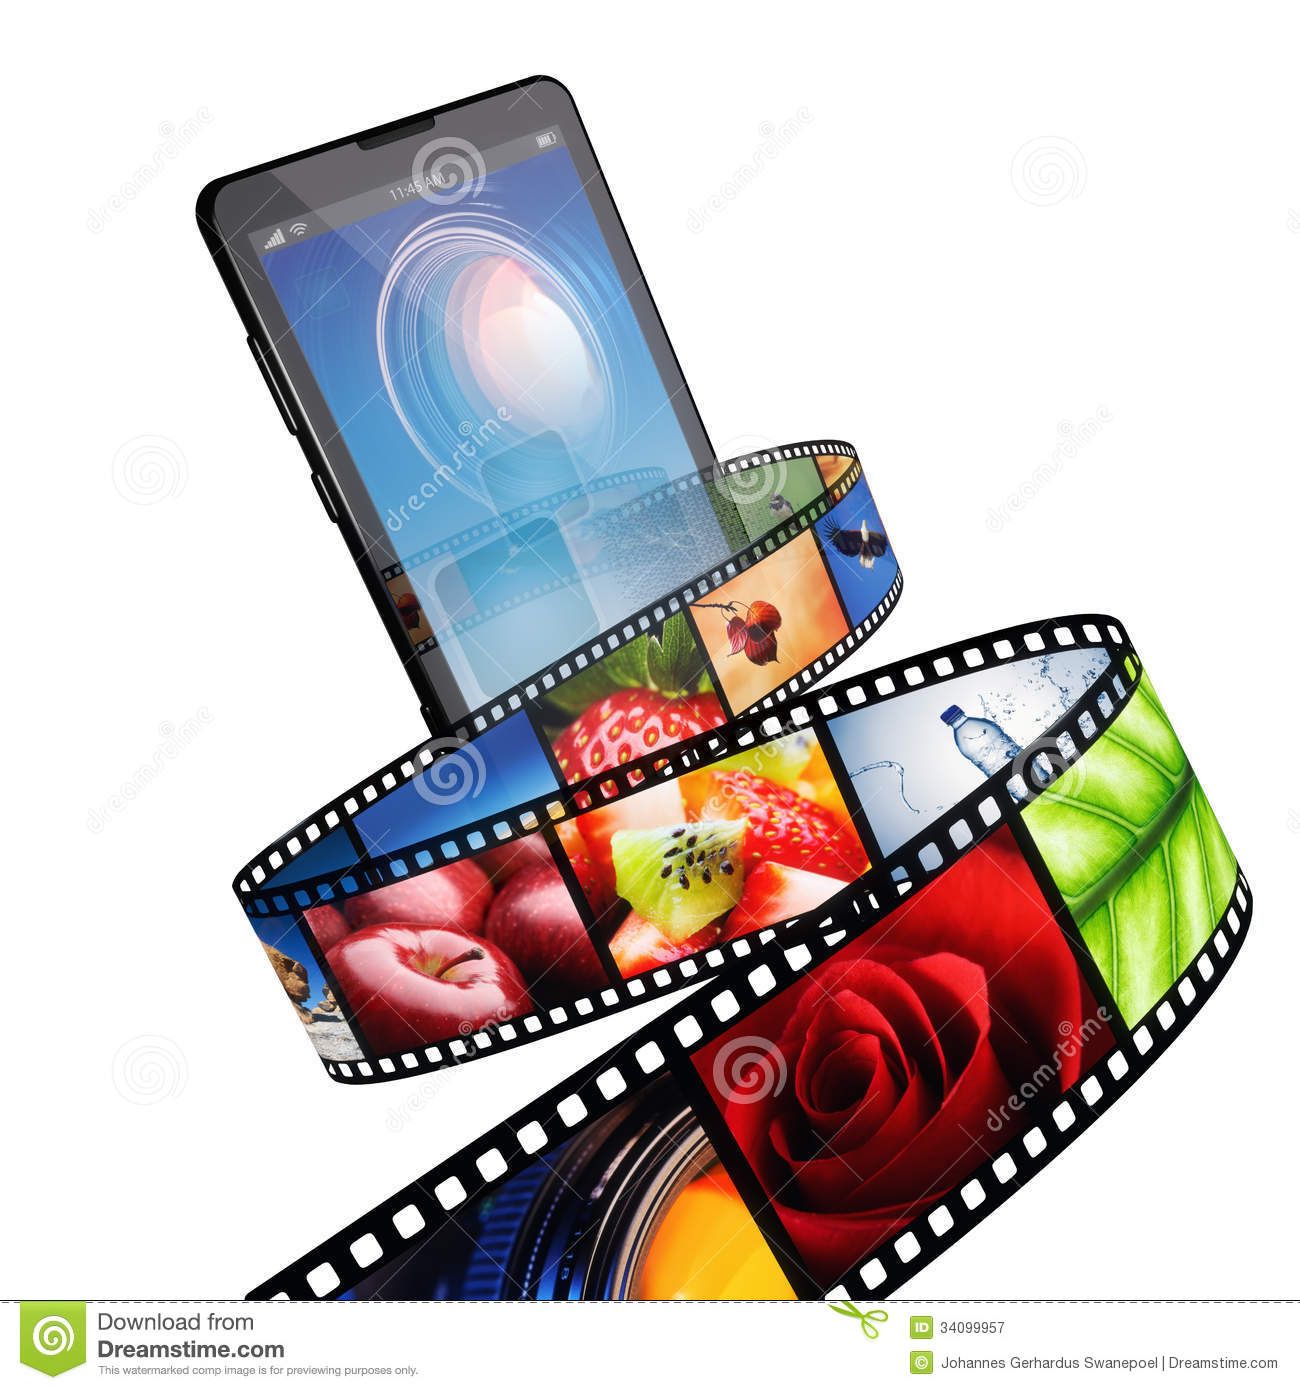 Streaming Video With Modern Mobile Phone Royalty Free Stock